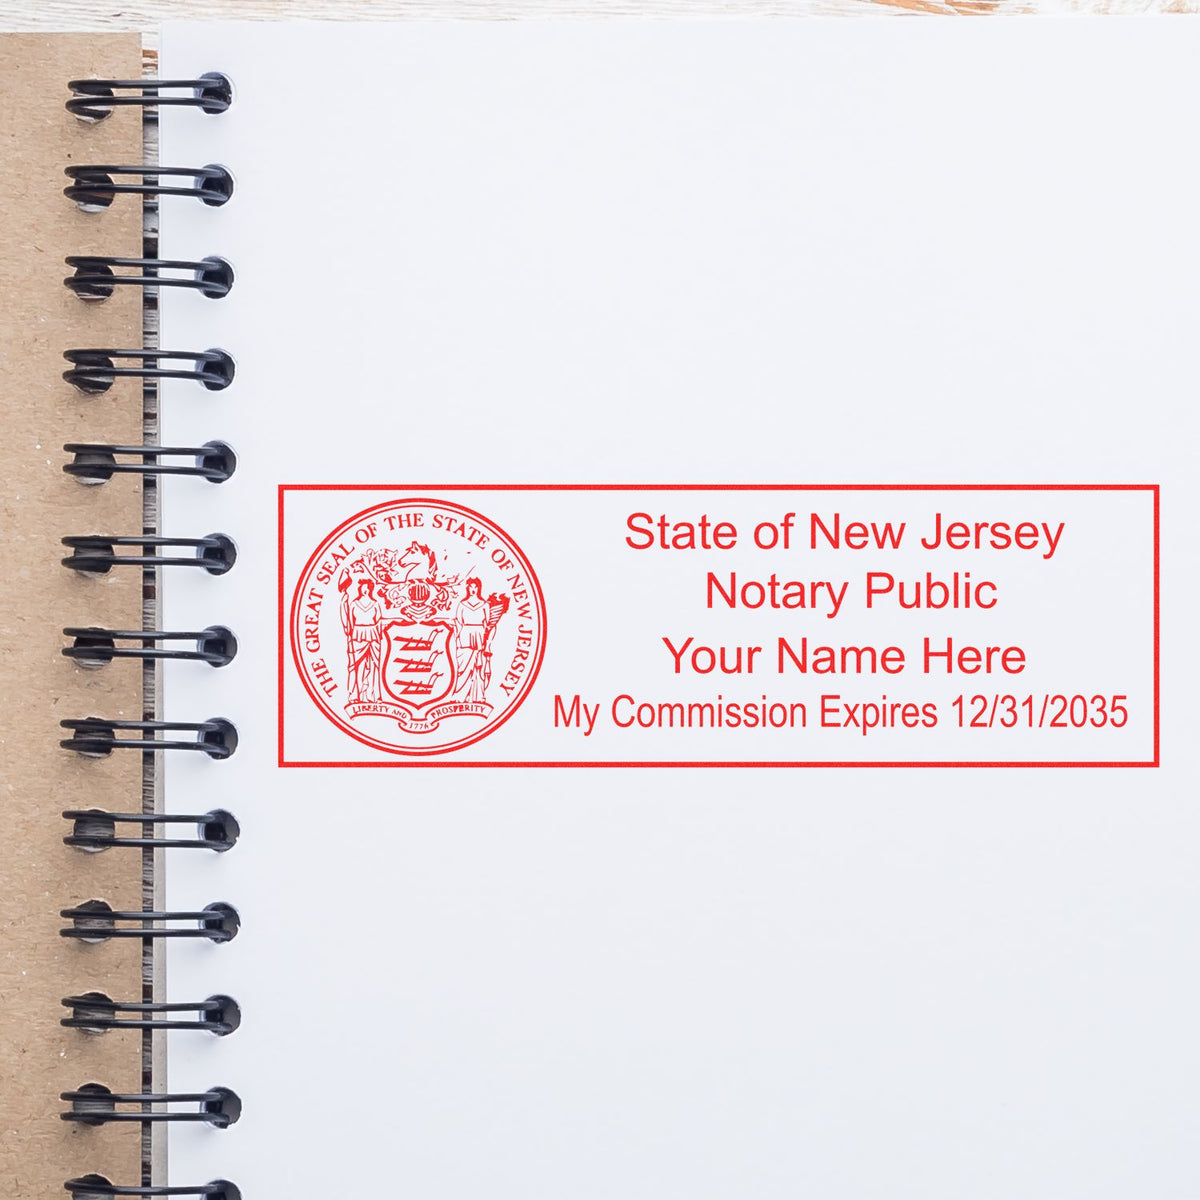 The Self-Inking State Seal New Jersey Notary Stamp stamp impression comes to life with a crisp, detailed photo on paper - showcasing true professional quality.